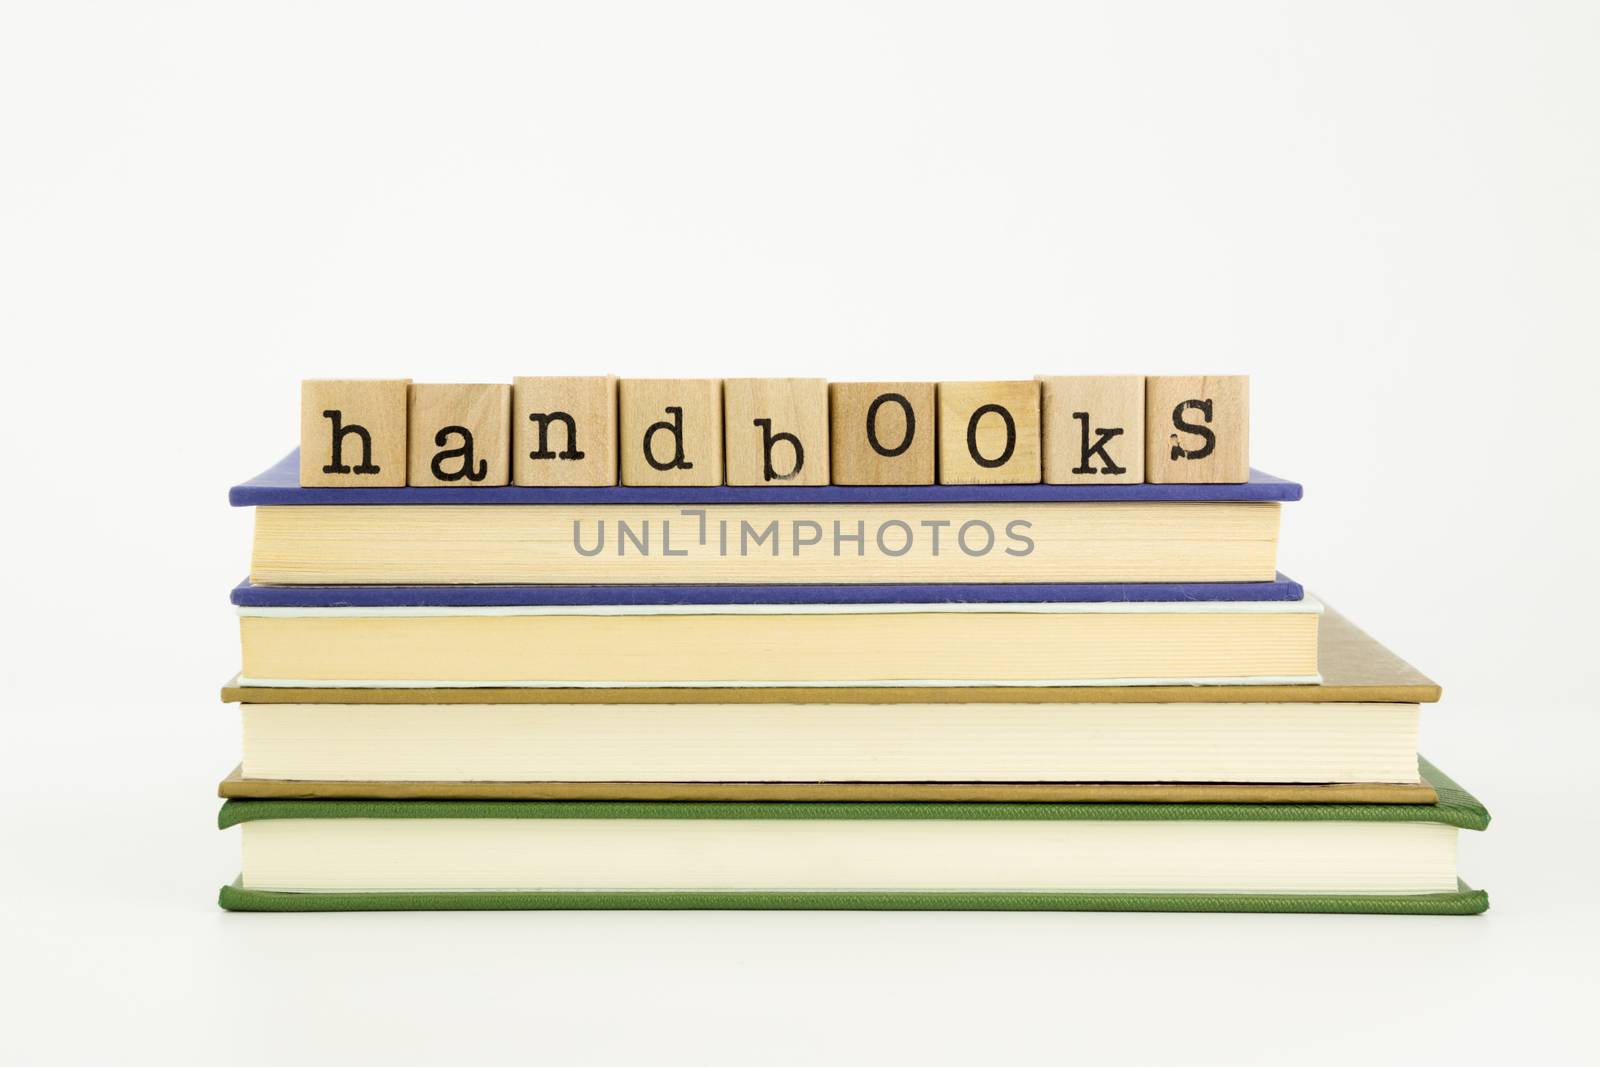 handbooks word on wood stamps and books by vinnstock